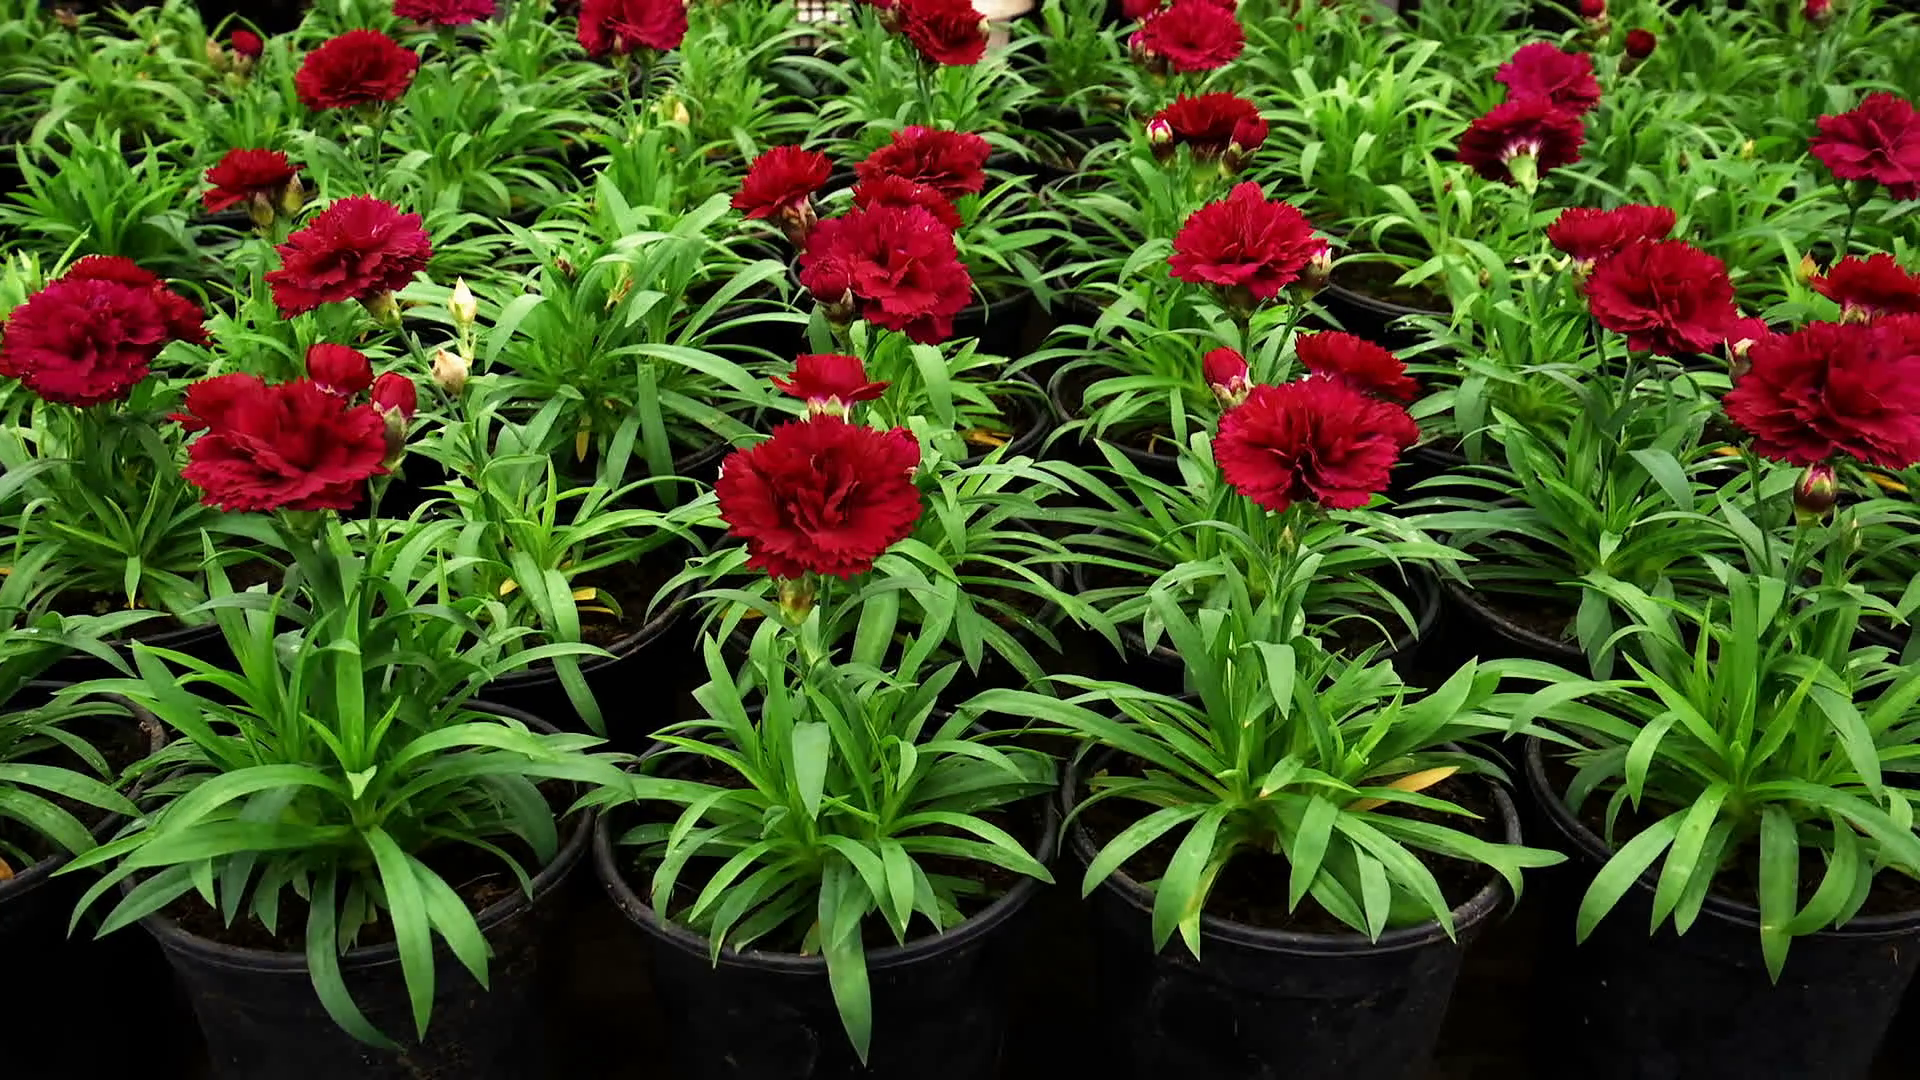 The Flowers of Carnation in Pots . Growing Flowers for Landscaping ...